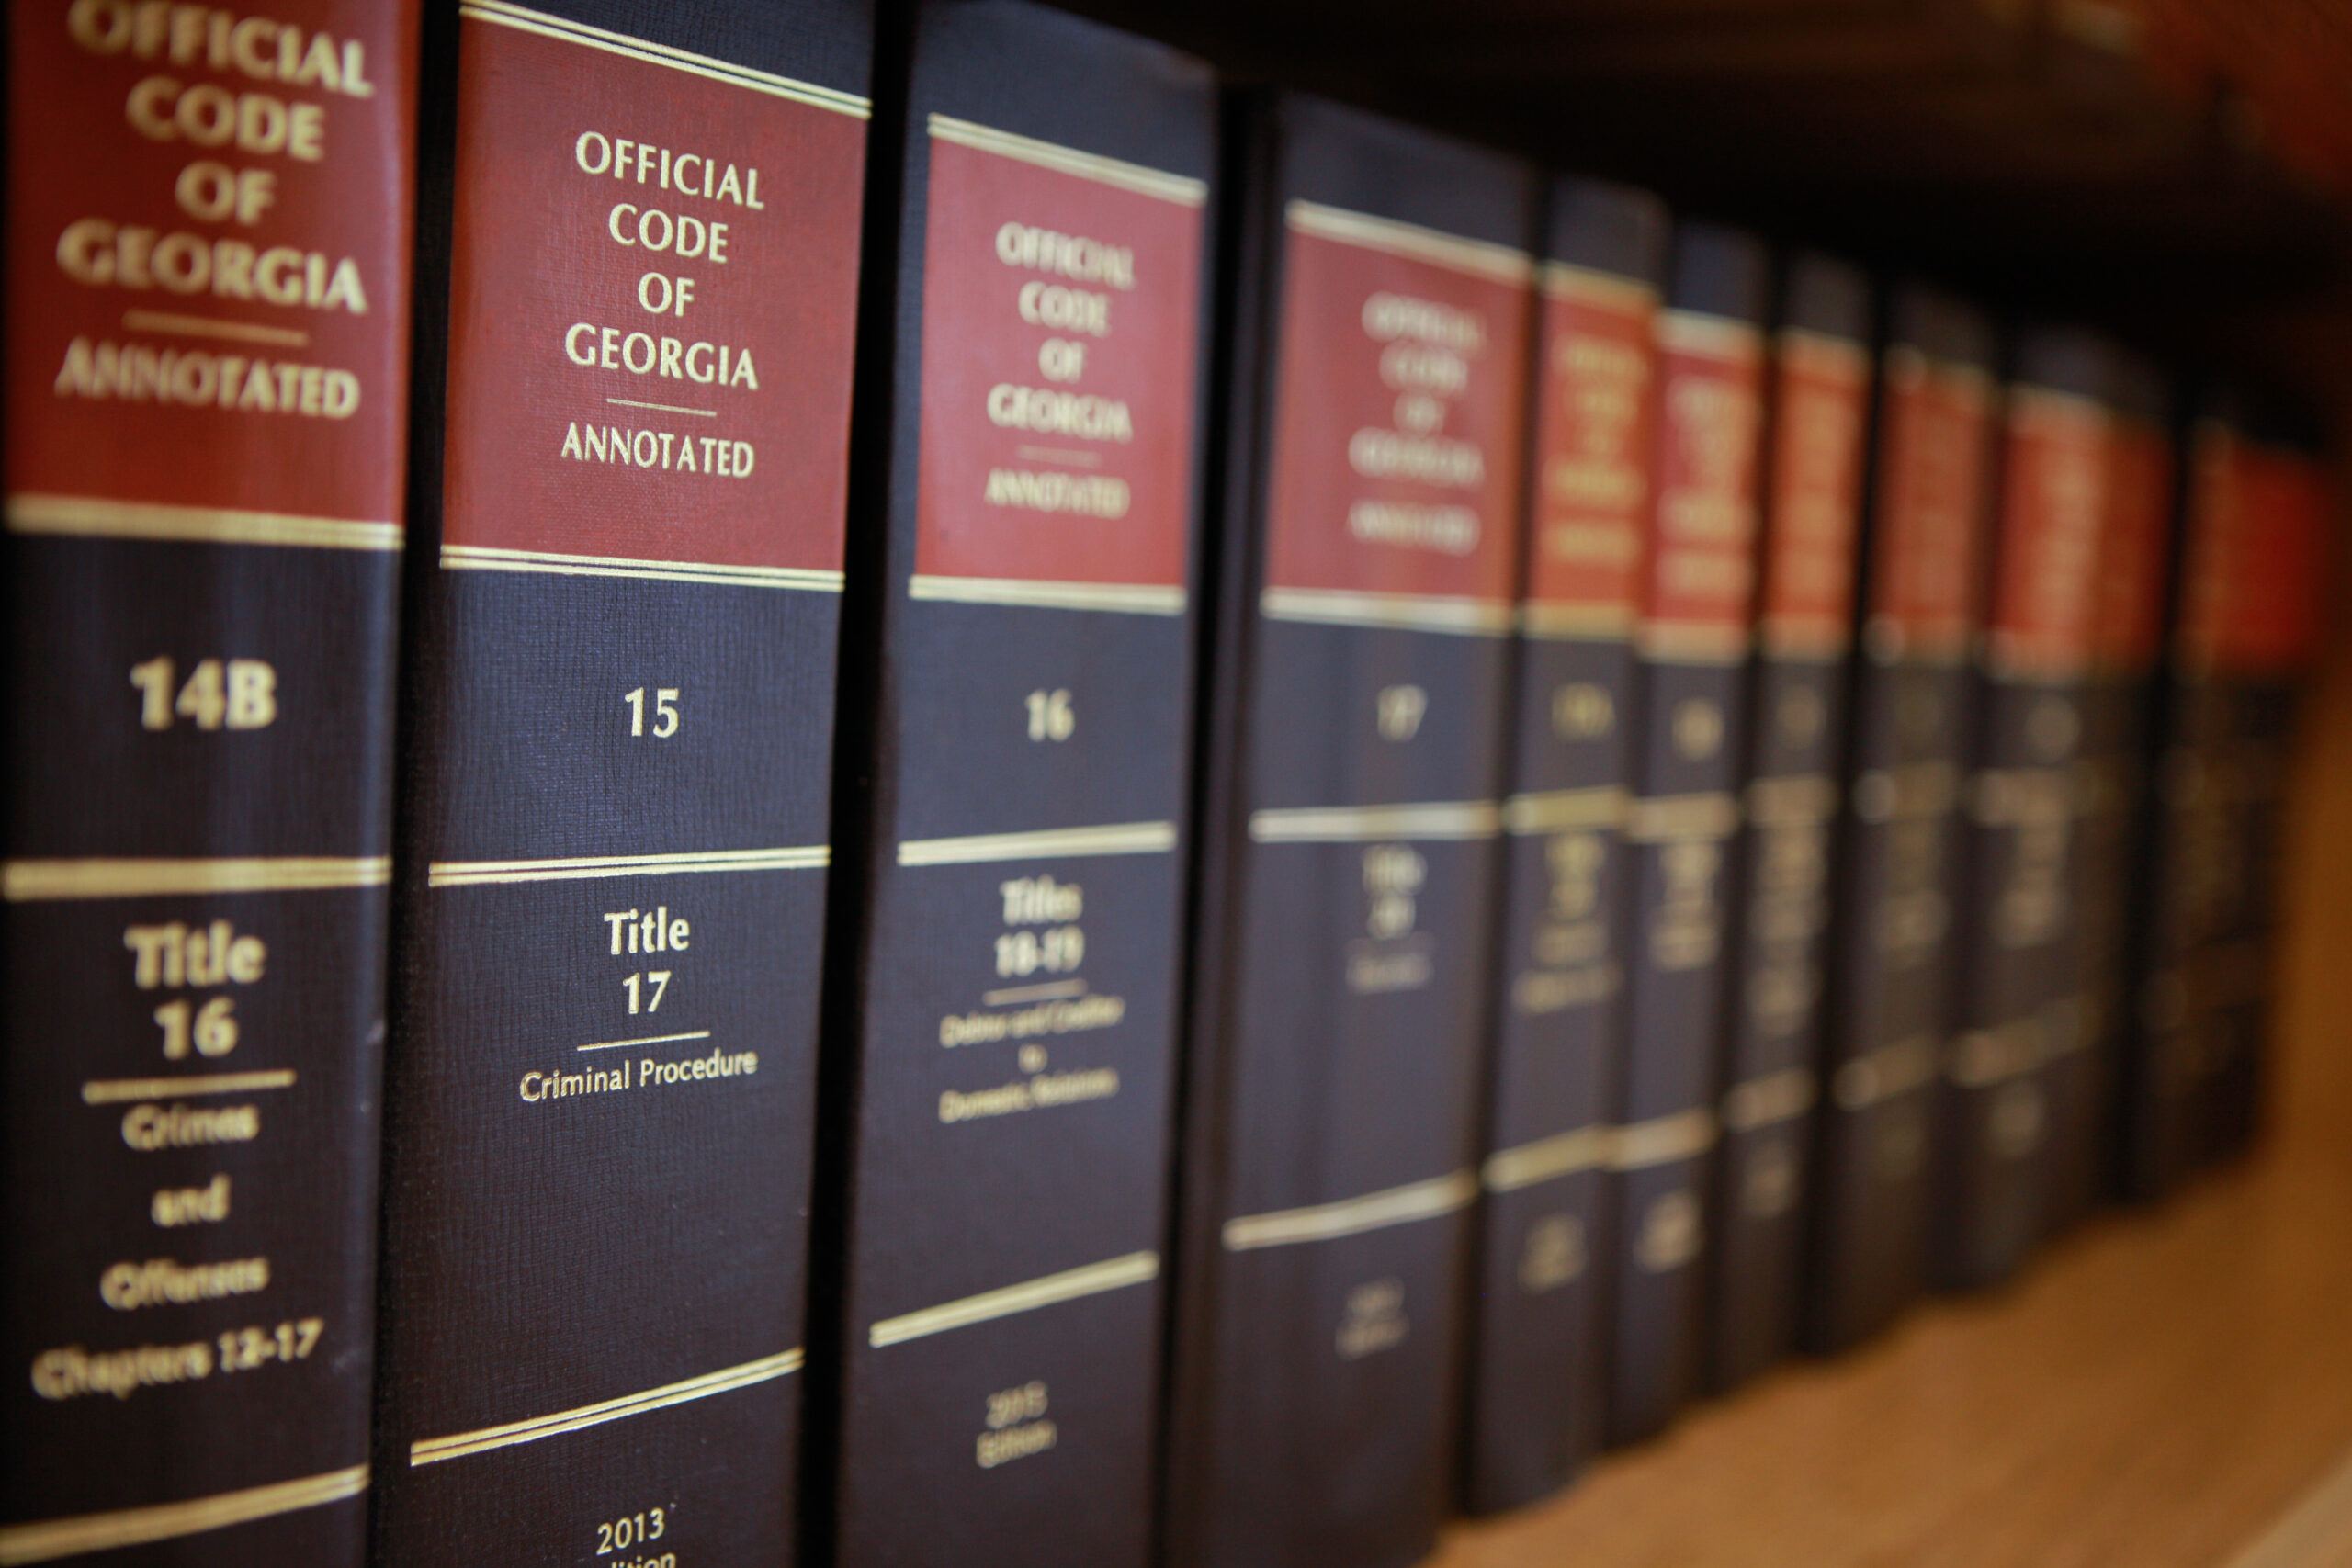 SWS Law Firm Office Law Books Carrollton Accident Attorneys - A close up shot of Georgia law books